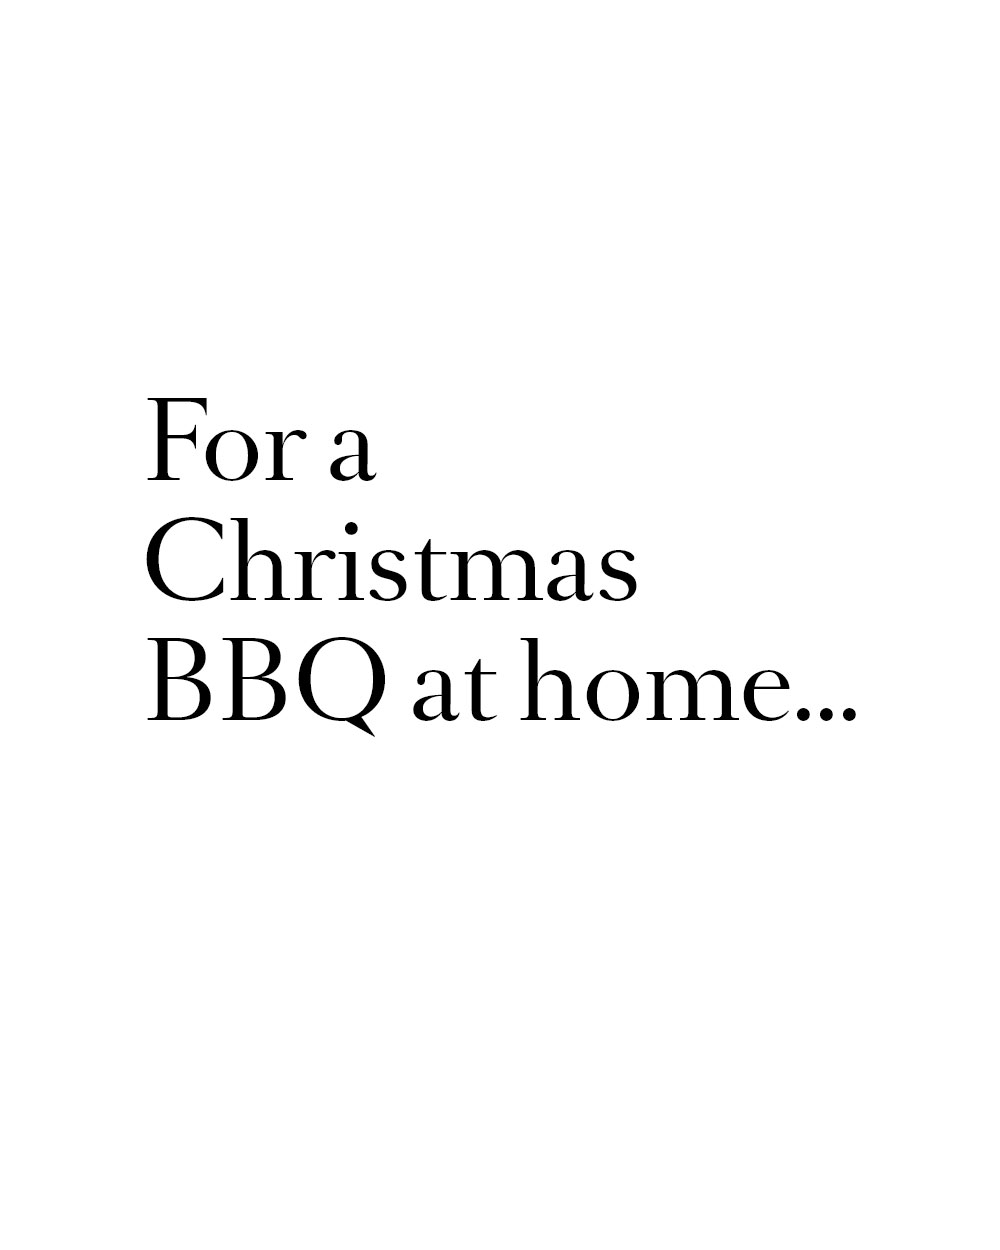 For a Christmas BBQ at home...